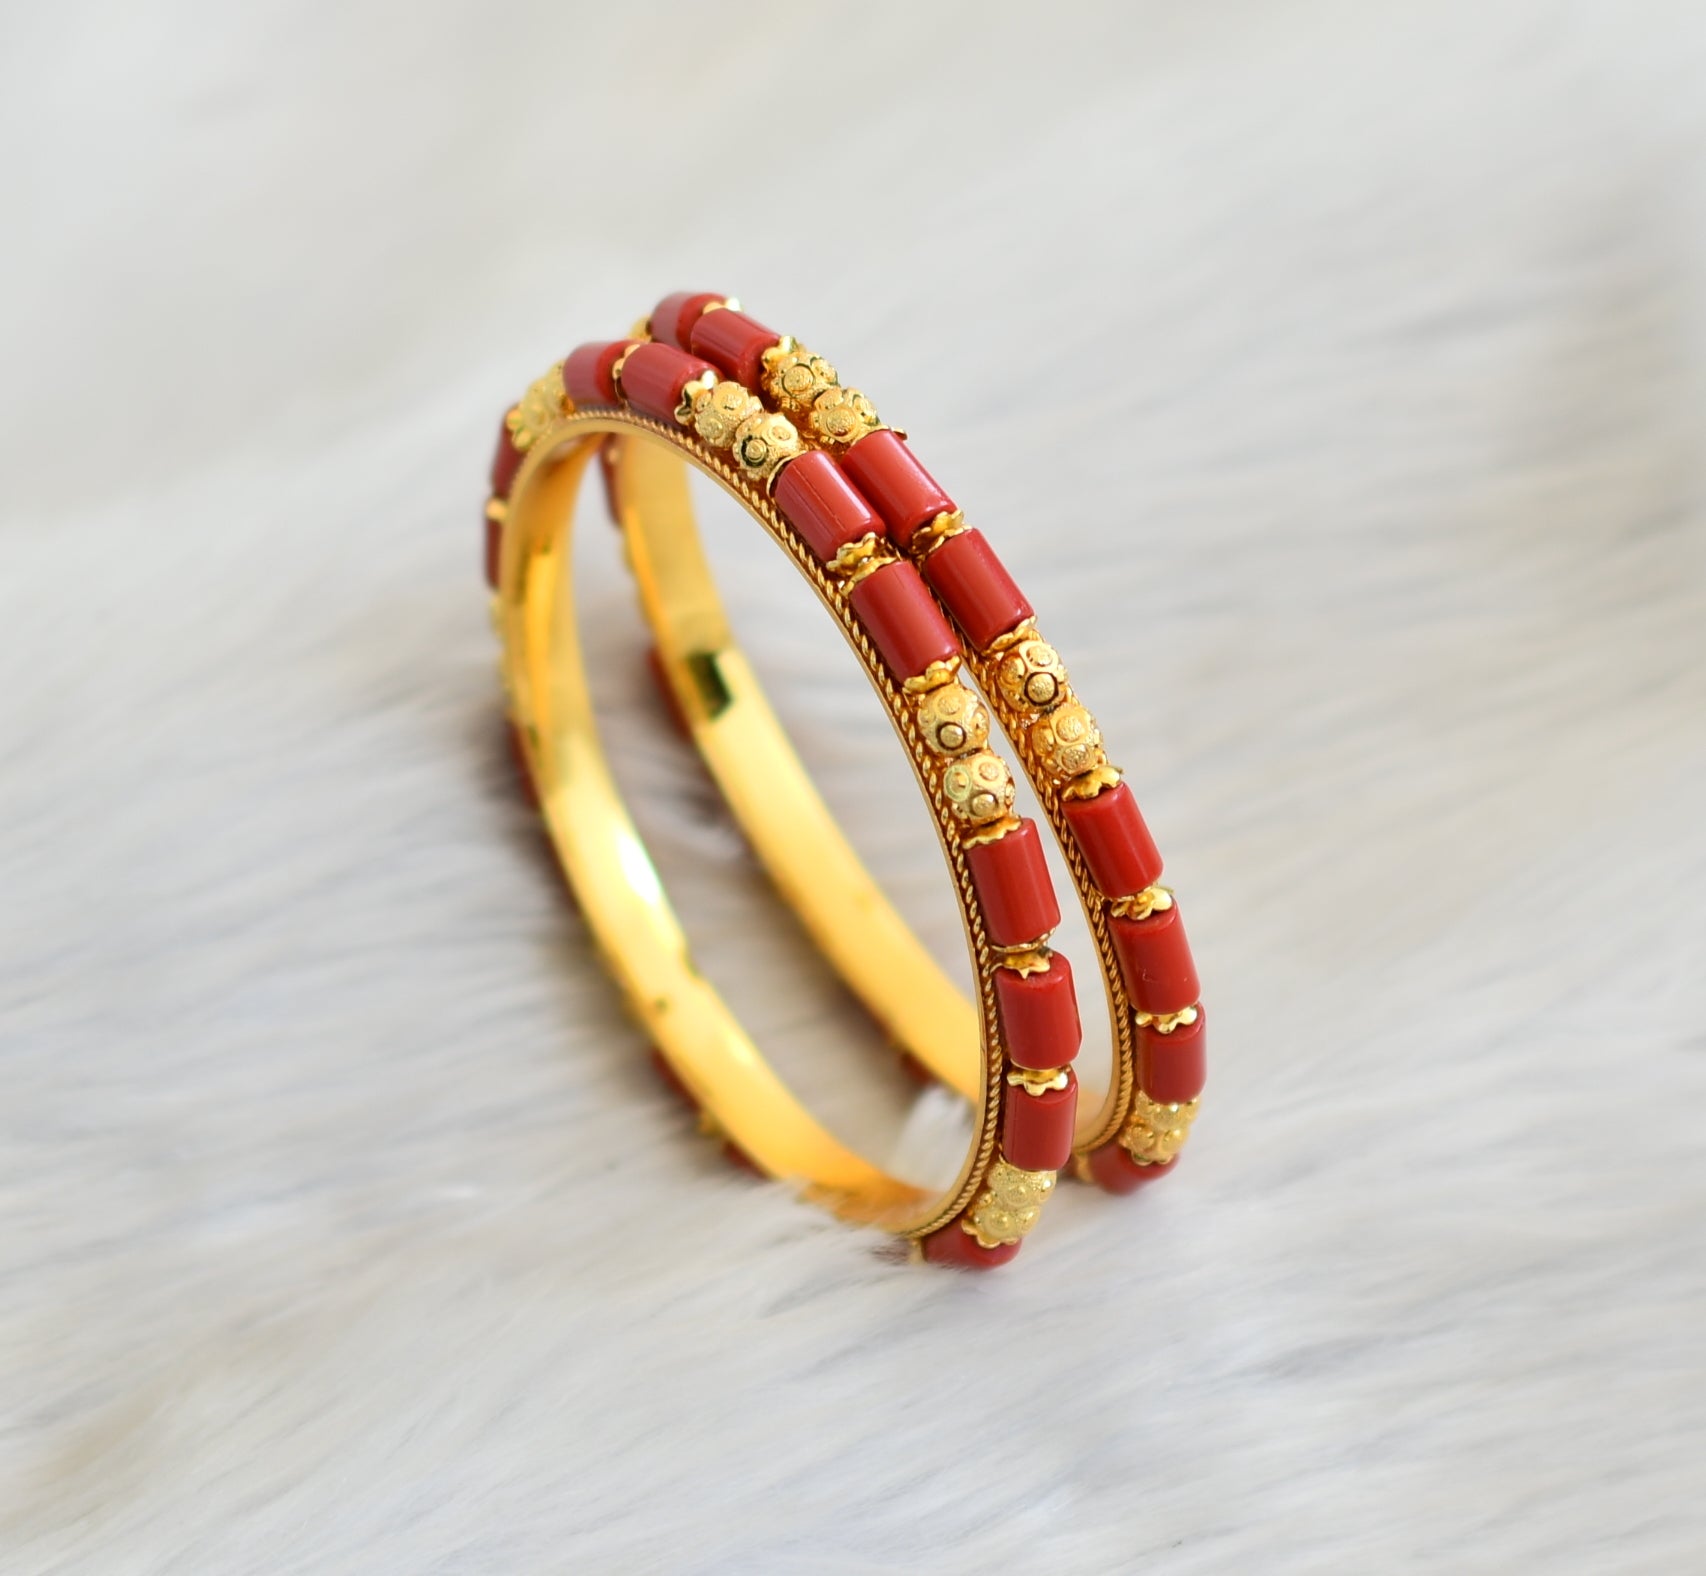 CORAL and 14k Gold Beaded Bracelet Mediterranean Red Coral Bracelet Genuine  Red Coral Bracelet Carved Round Beads Gift for Her - Etsy